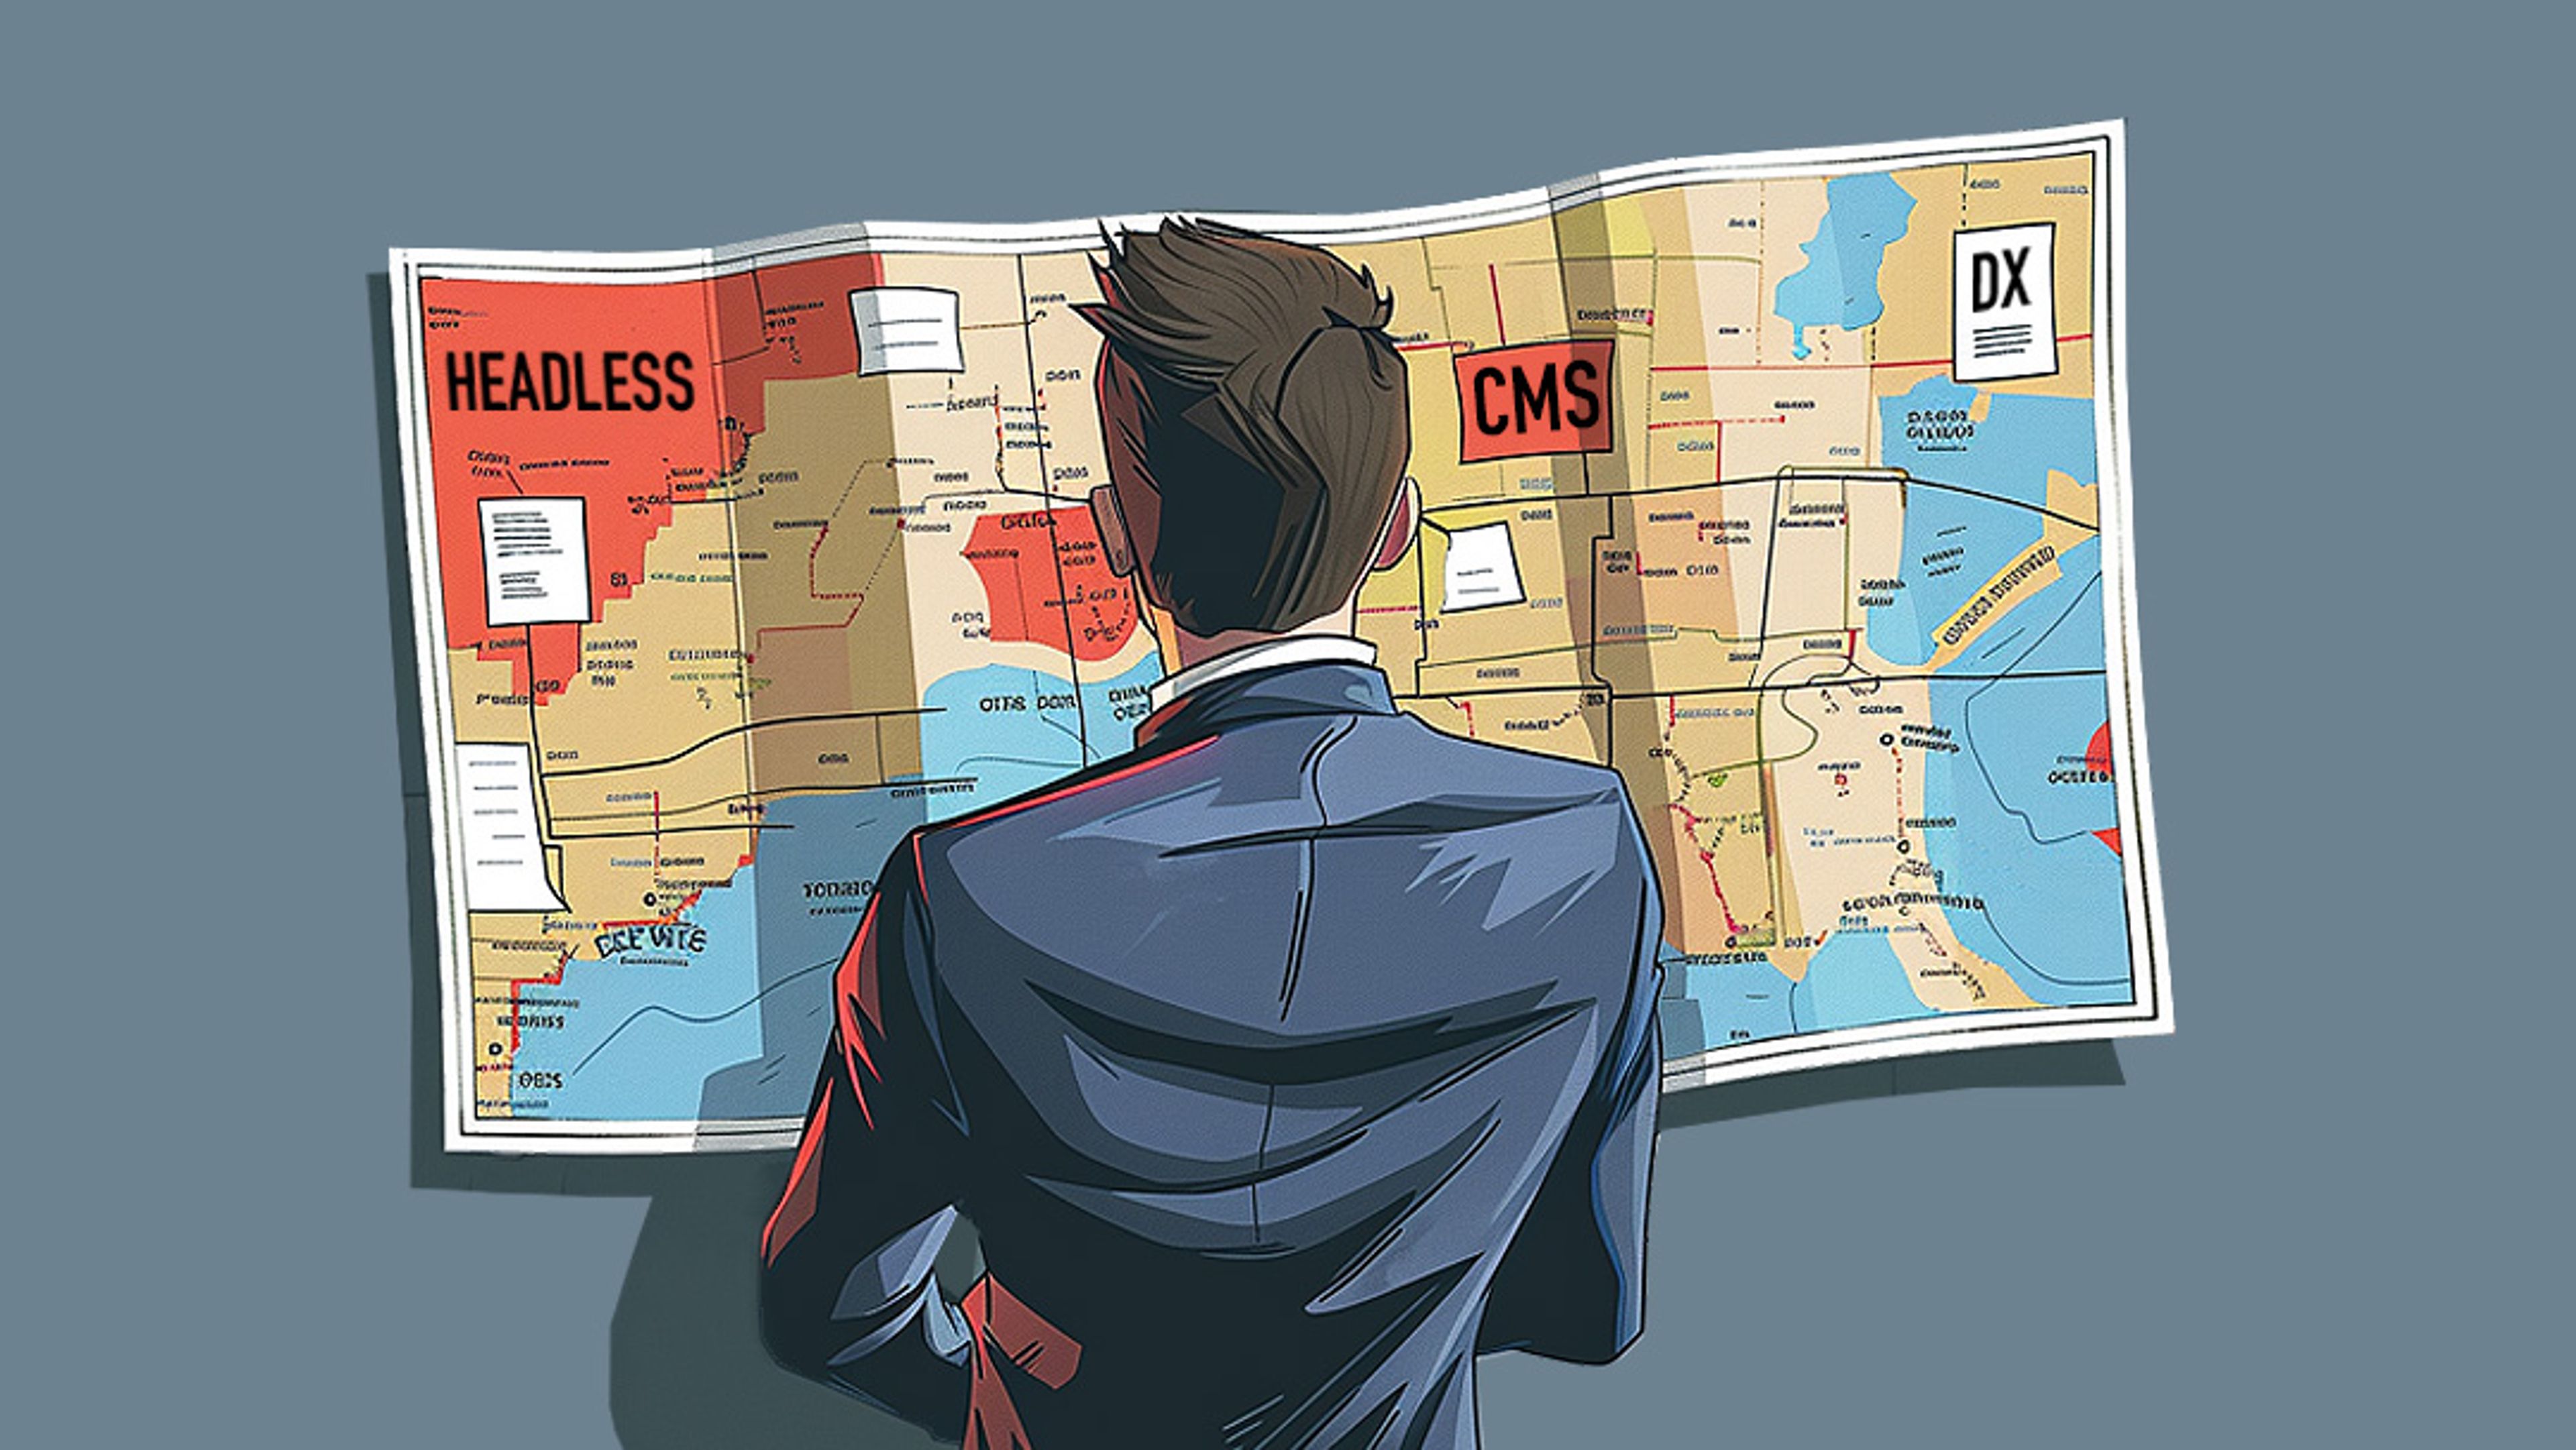 Graphical image of a man standing in front of a map on a wall with the words "CMS," HEADLESS," and "DX" on the map